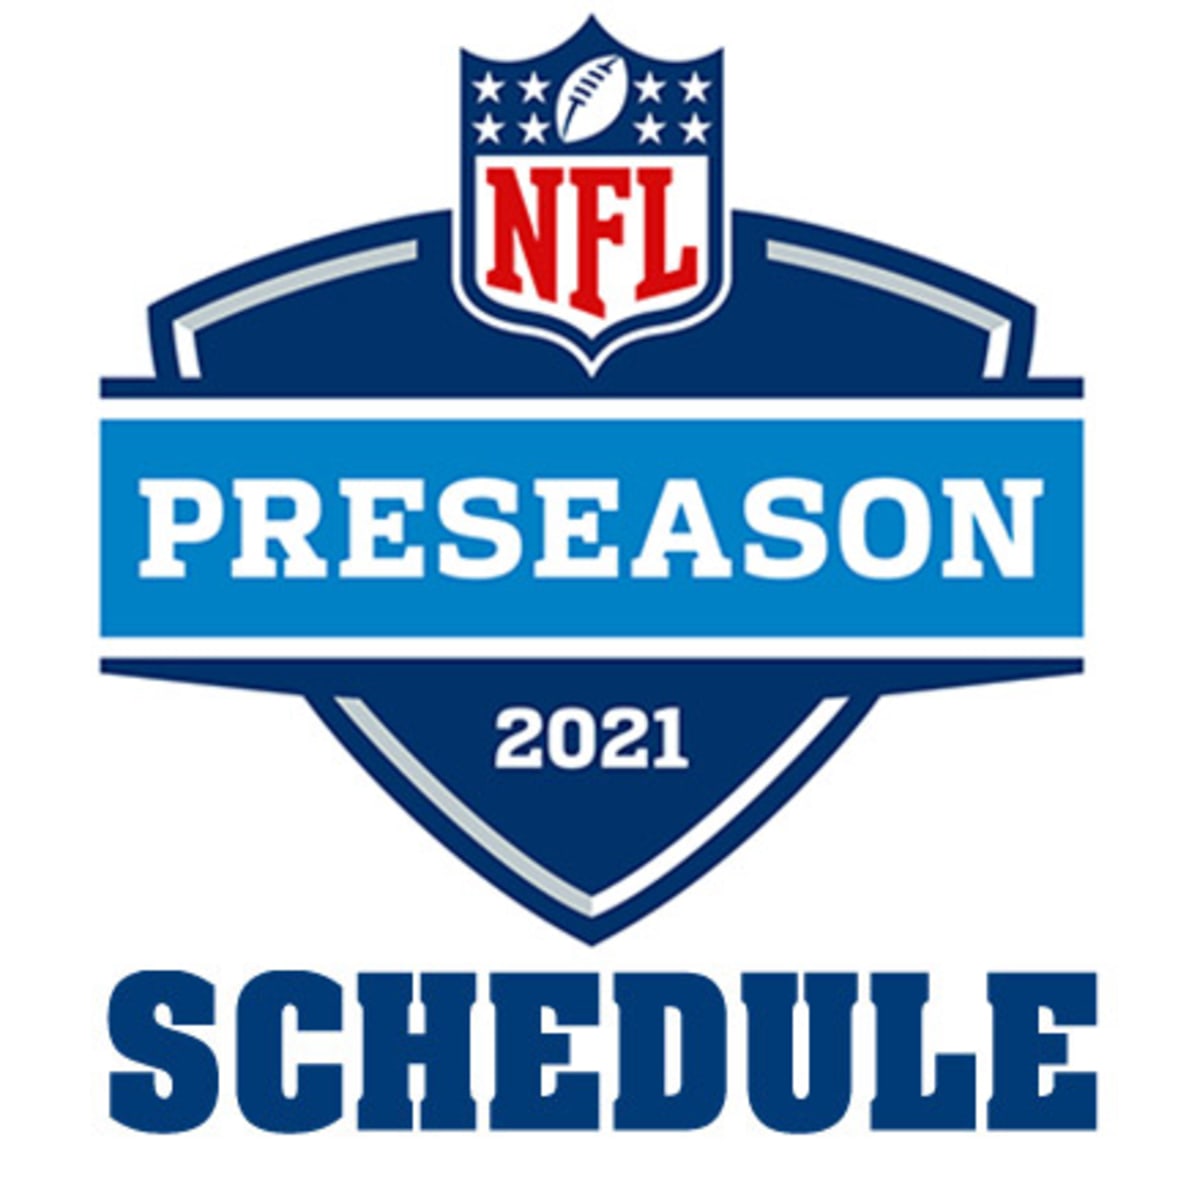 Nfl Preseason Schedule 2021 Athlonsports Com Expert Predictions Picks And Previews